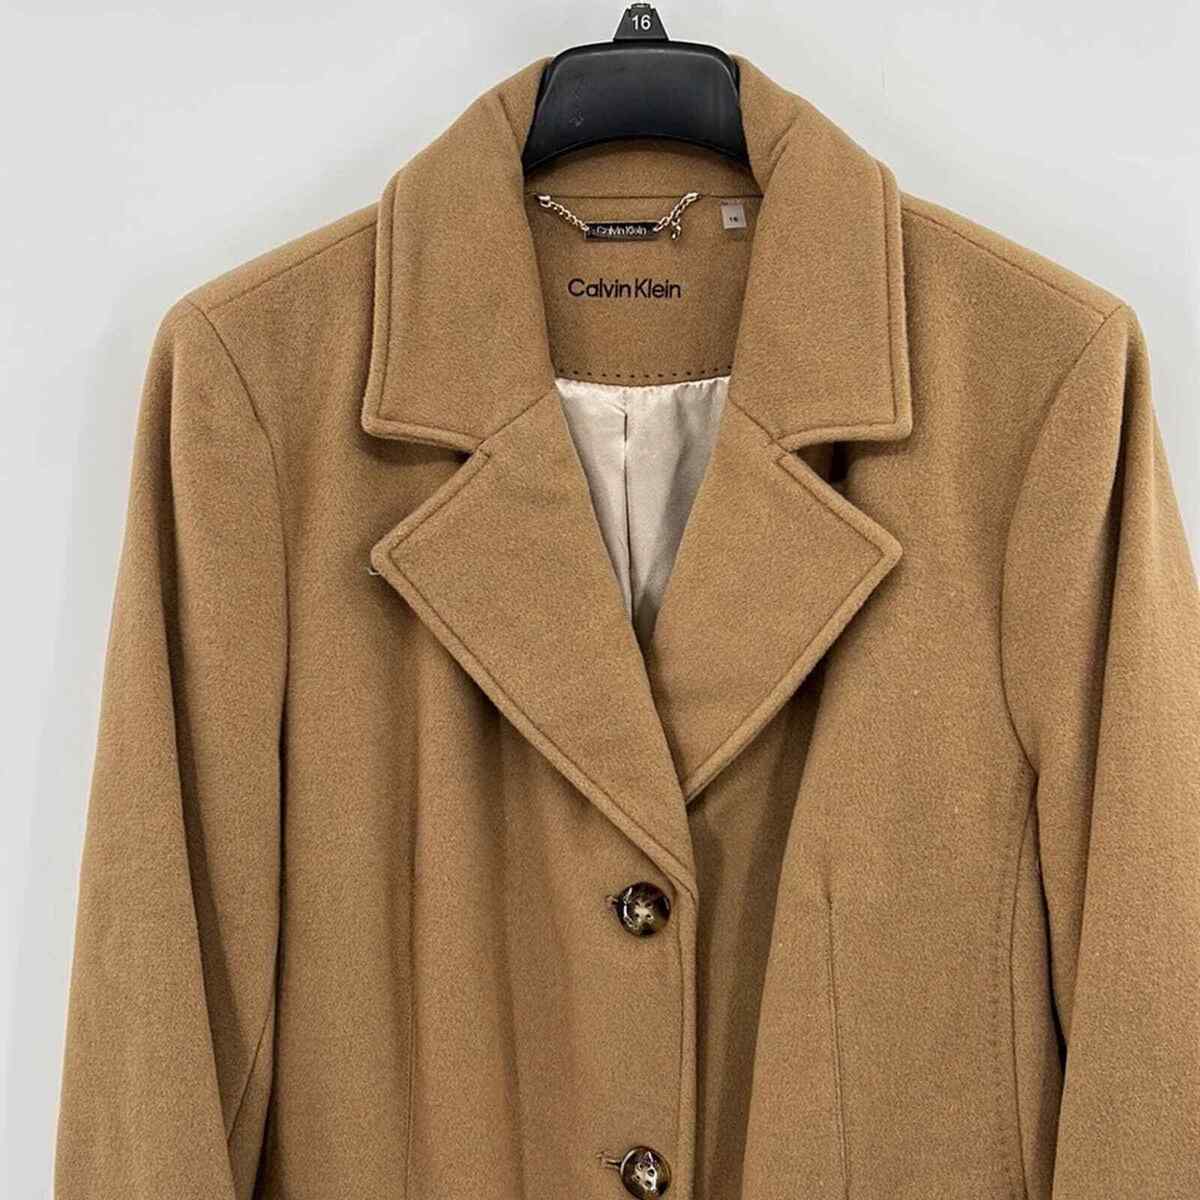 Calvin Klein Single-Breasted Wool Cashmere Coat - Camel - 16 - New with  tags | eBay